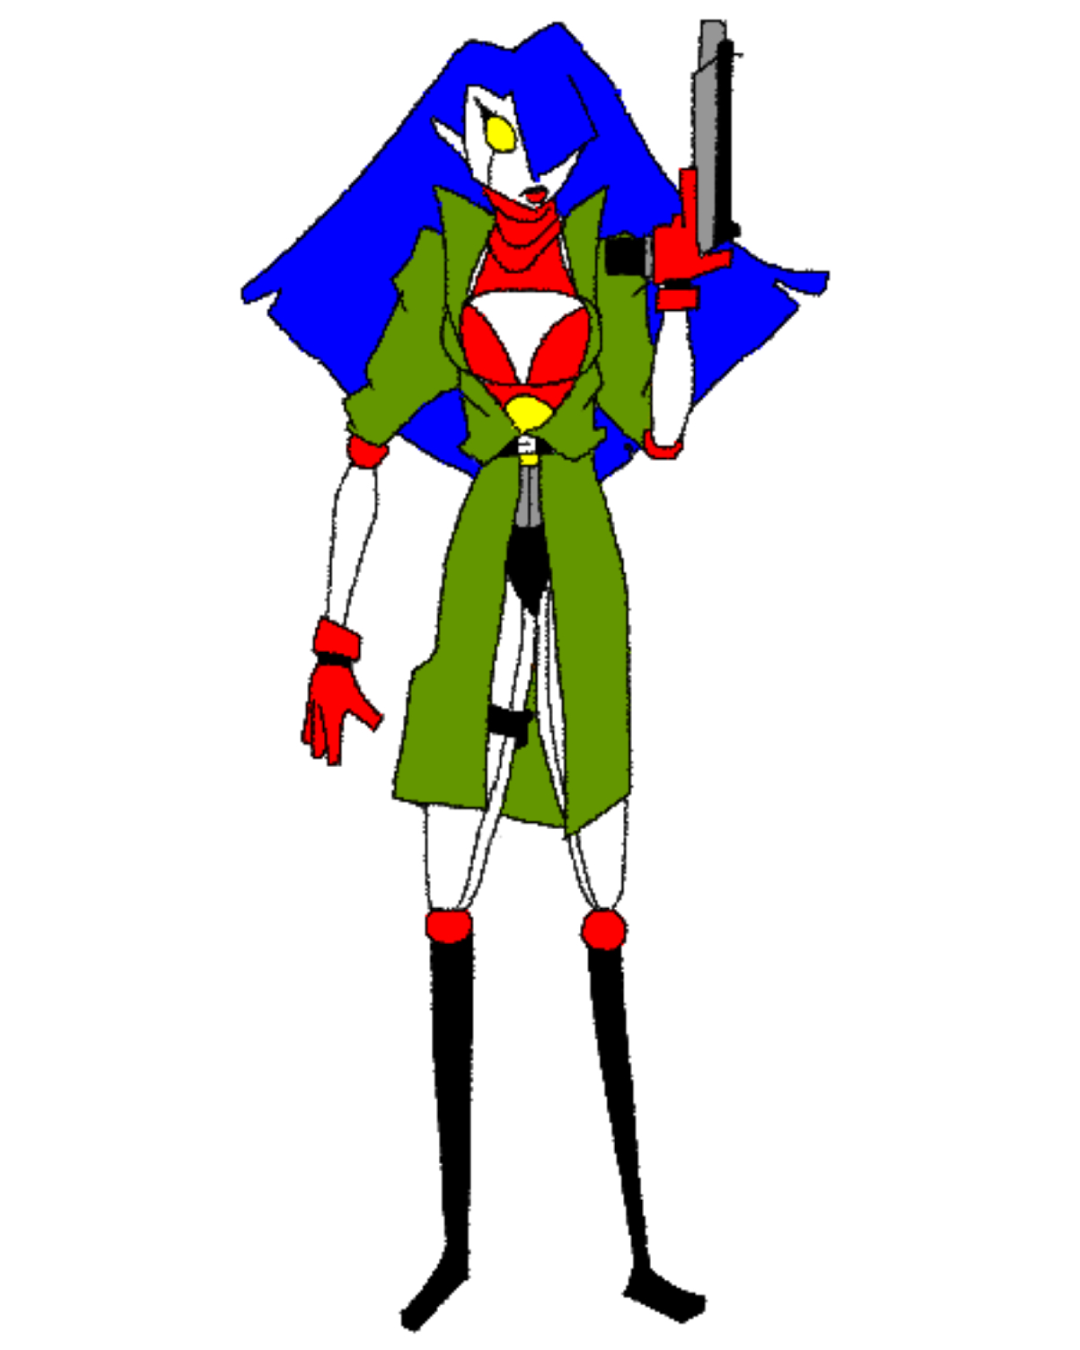 Robot girl with blue hair, wearing a green jacket, red gloves, red bra, and black leggings